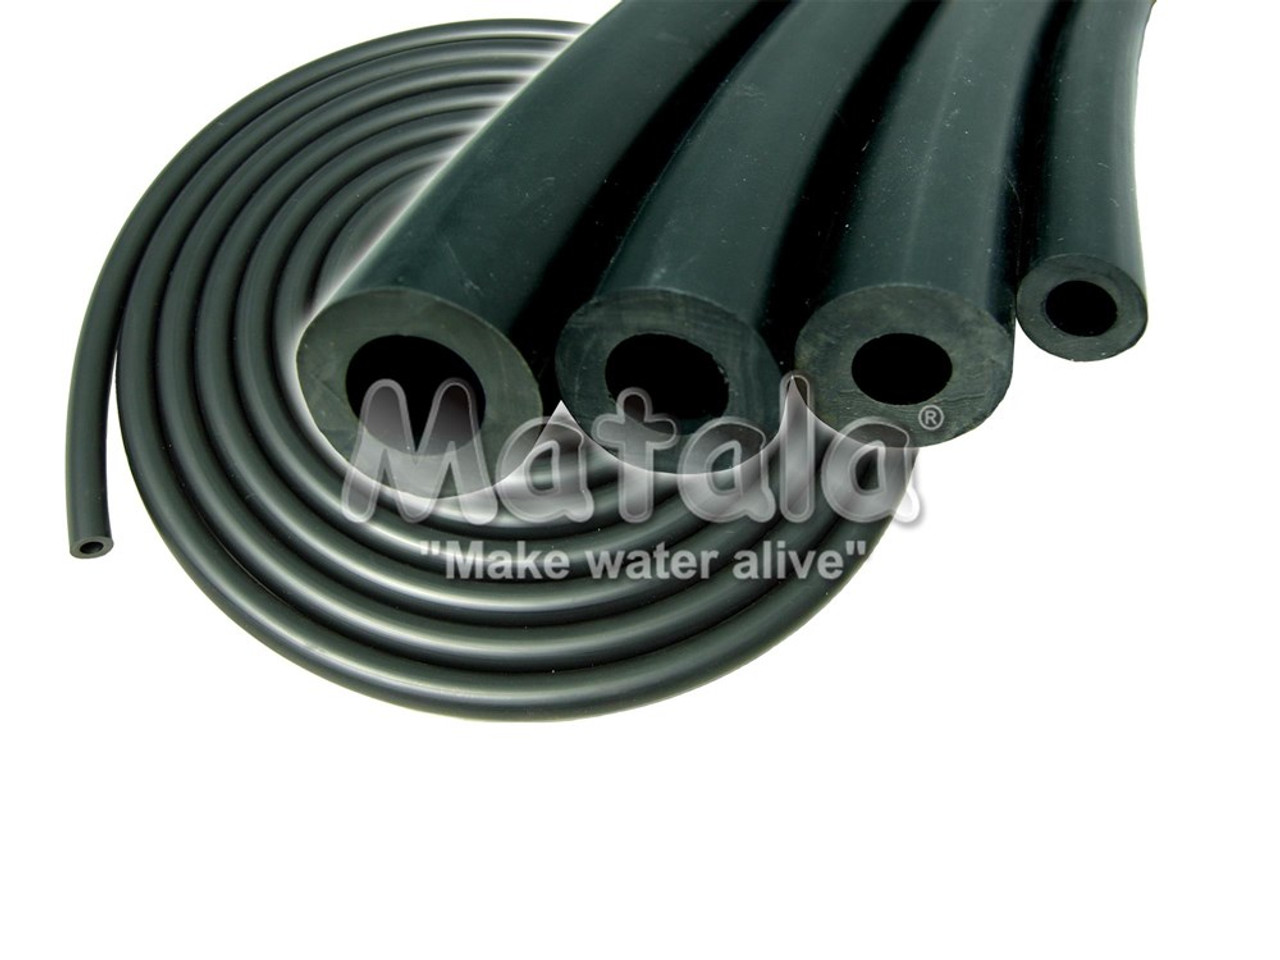 5/8" ID Matala Weighted Air Tubing - 100 ft. Roll